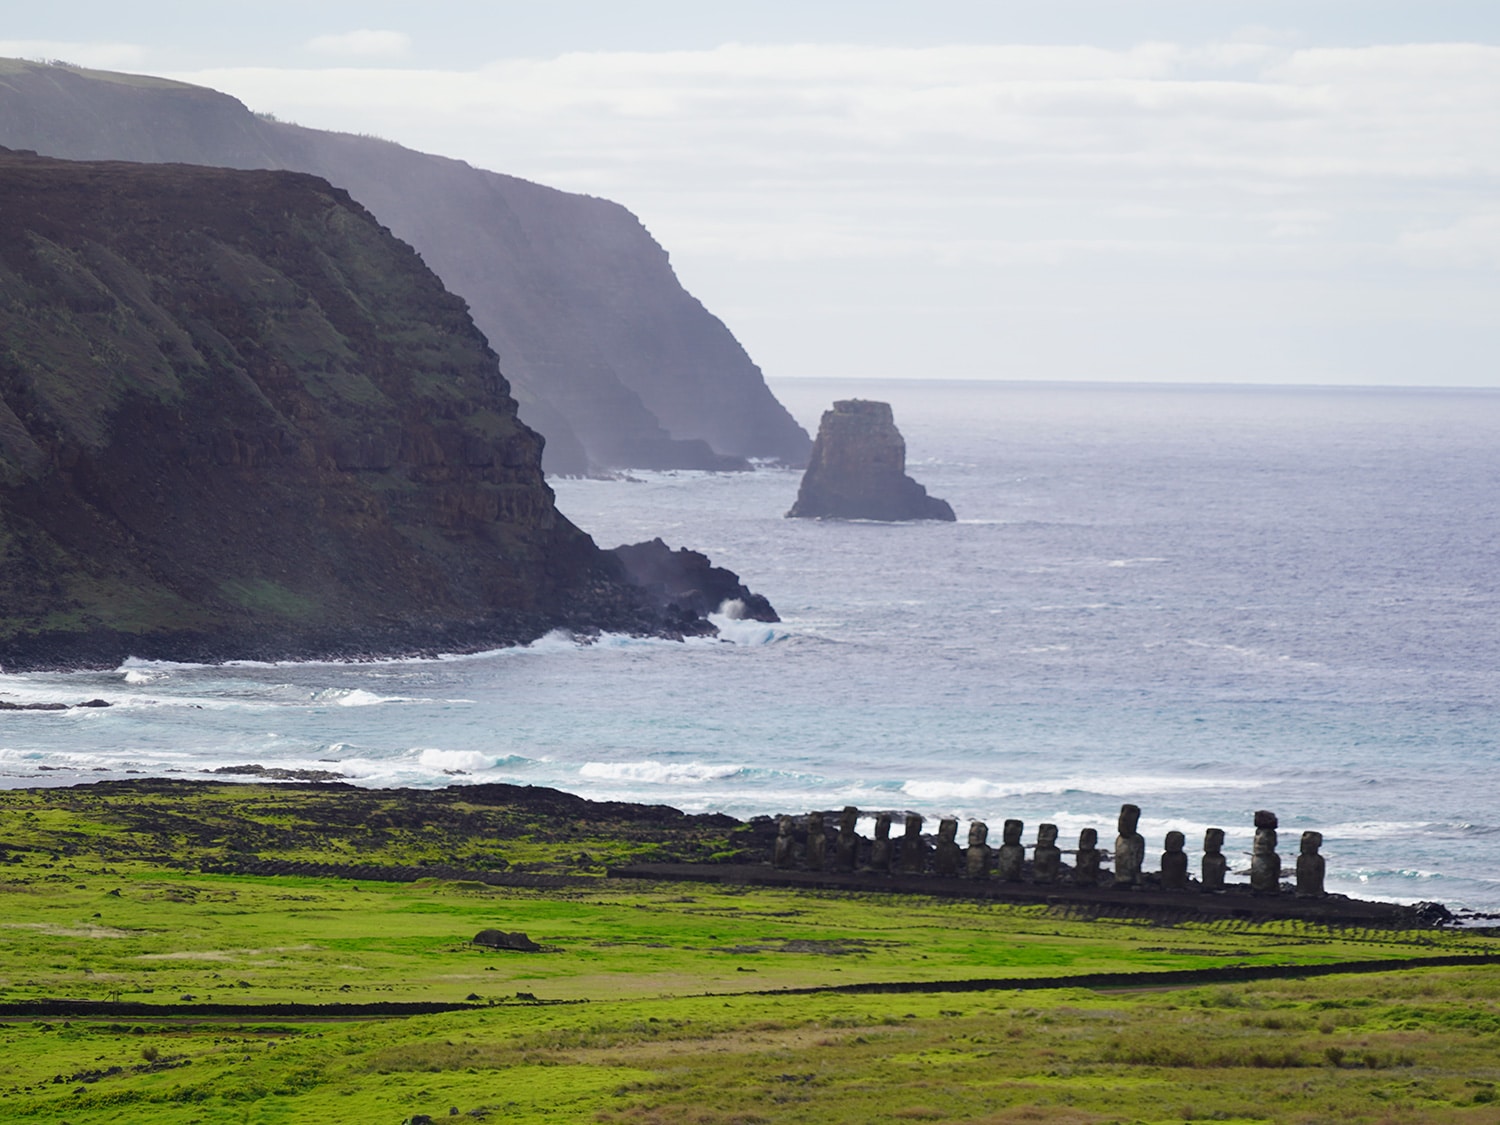 A view of the moai in Tongariki, Easter Island.